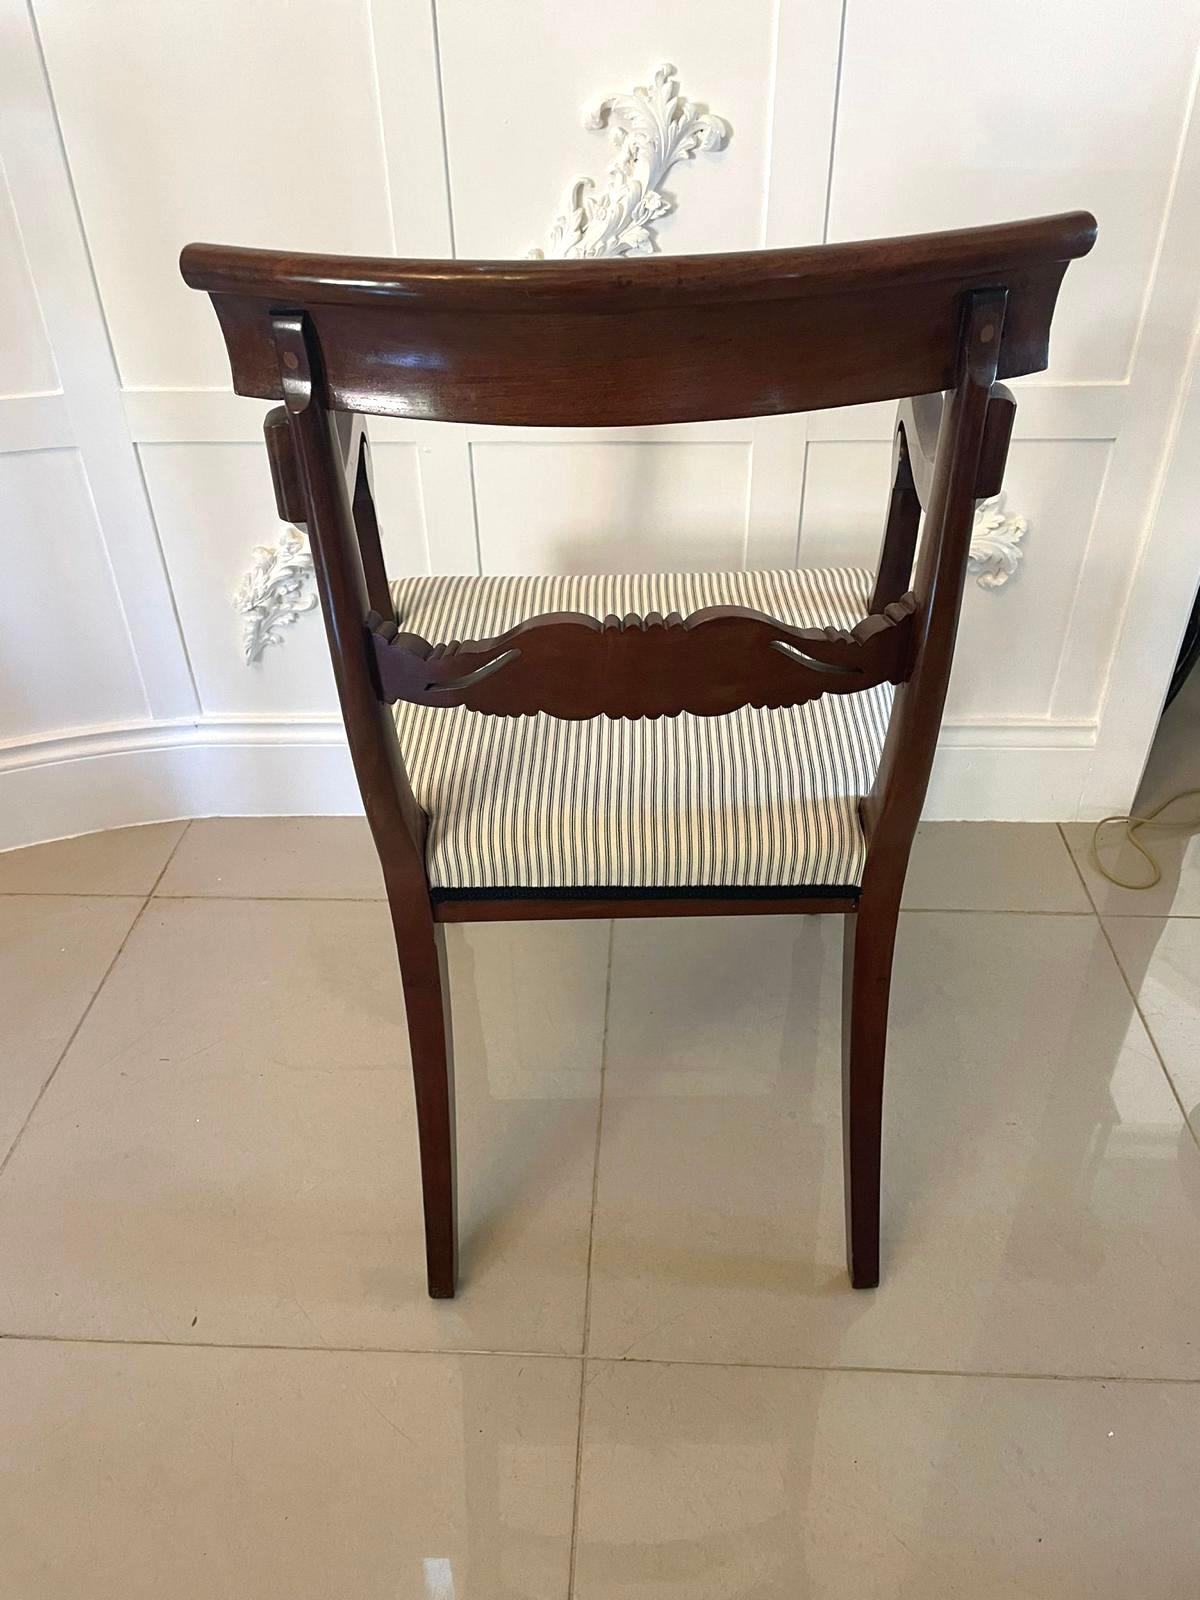 Other Antique Regency Quality Carved Mahogany Desk Chair For Sale